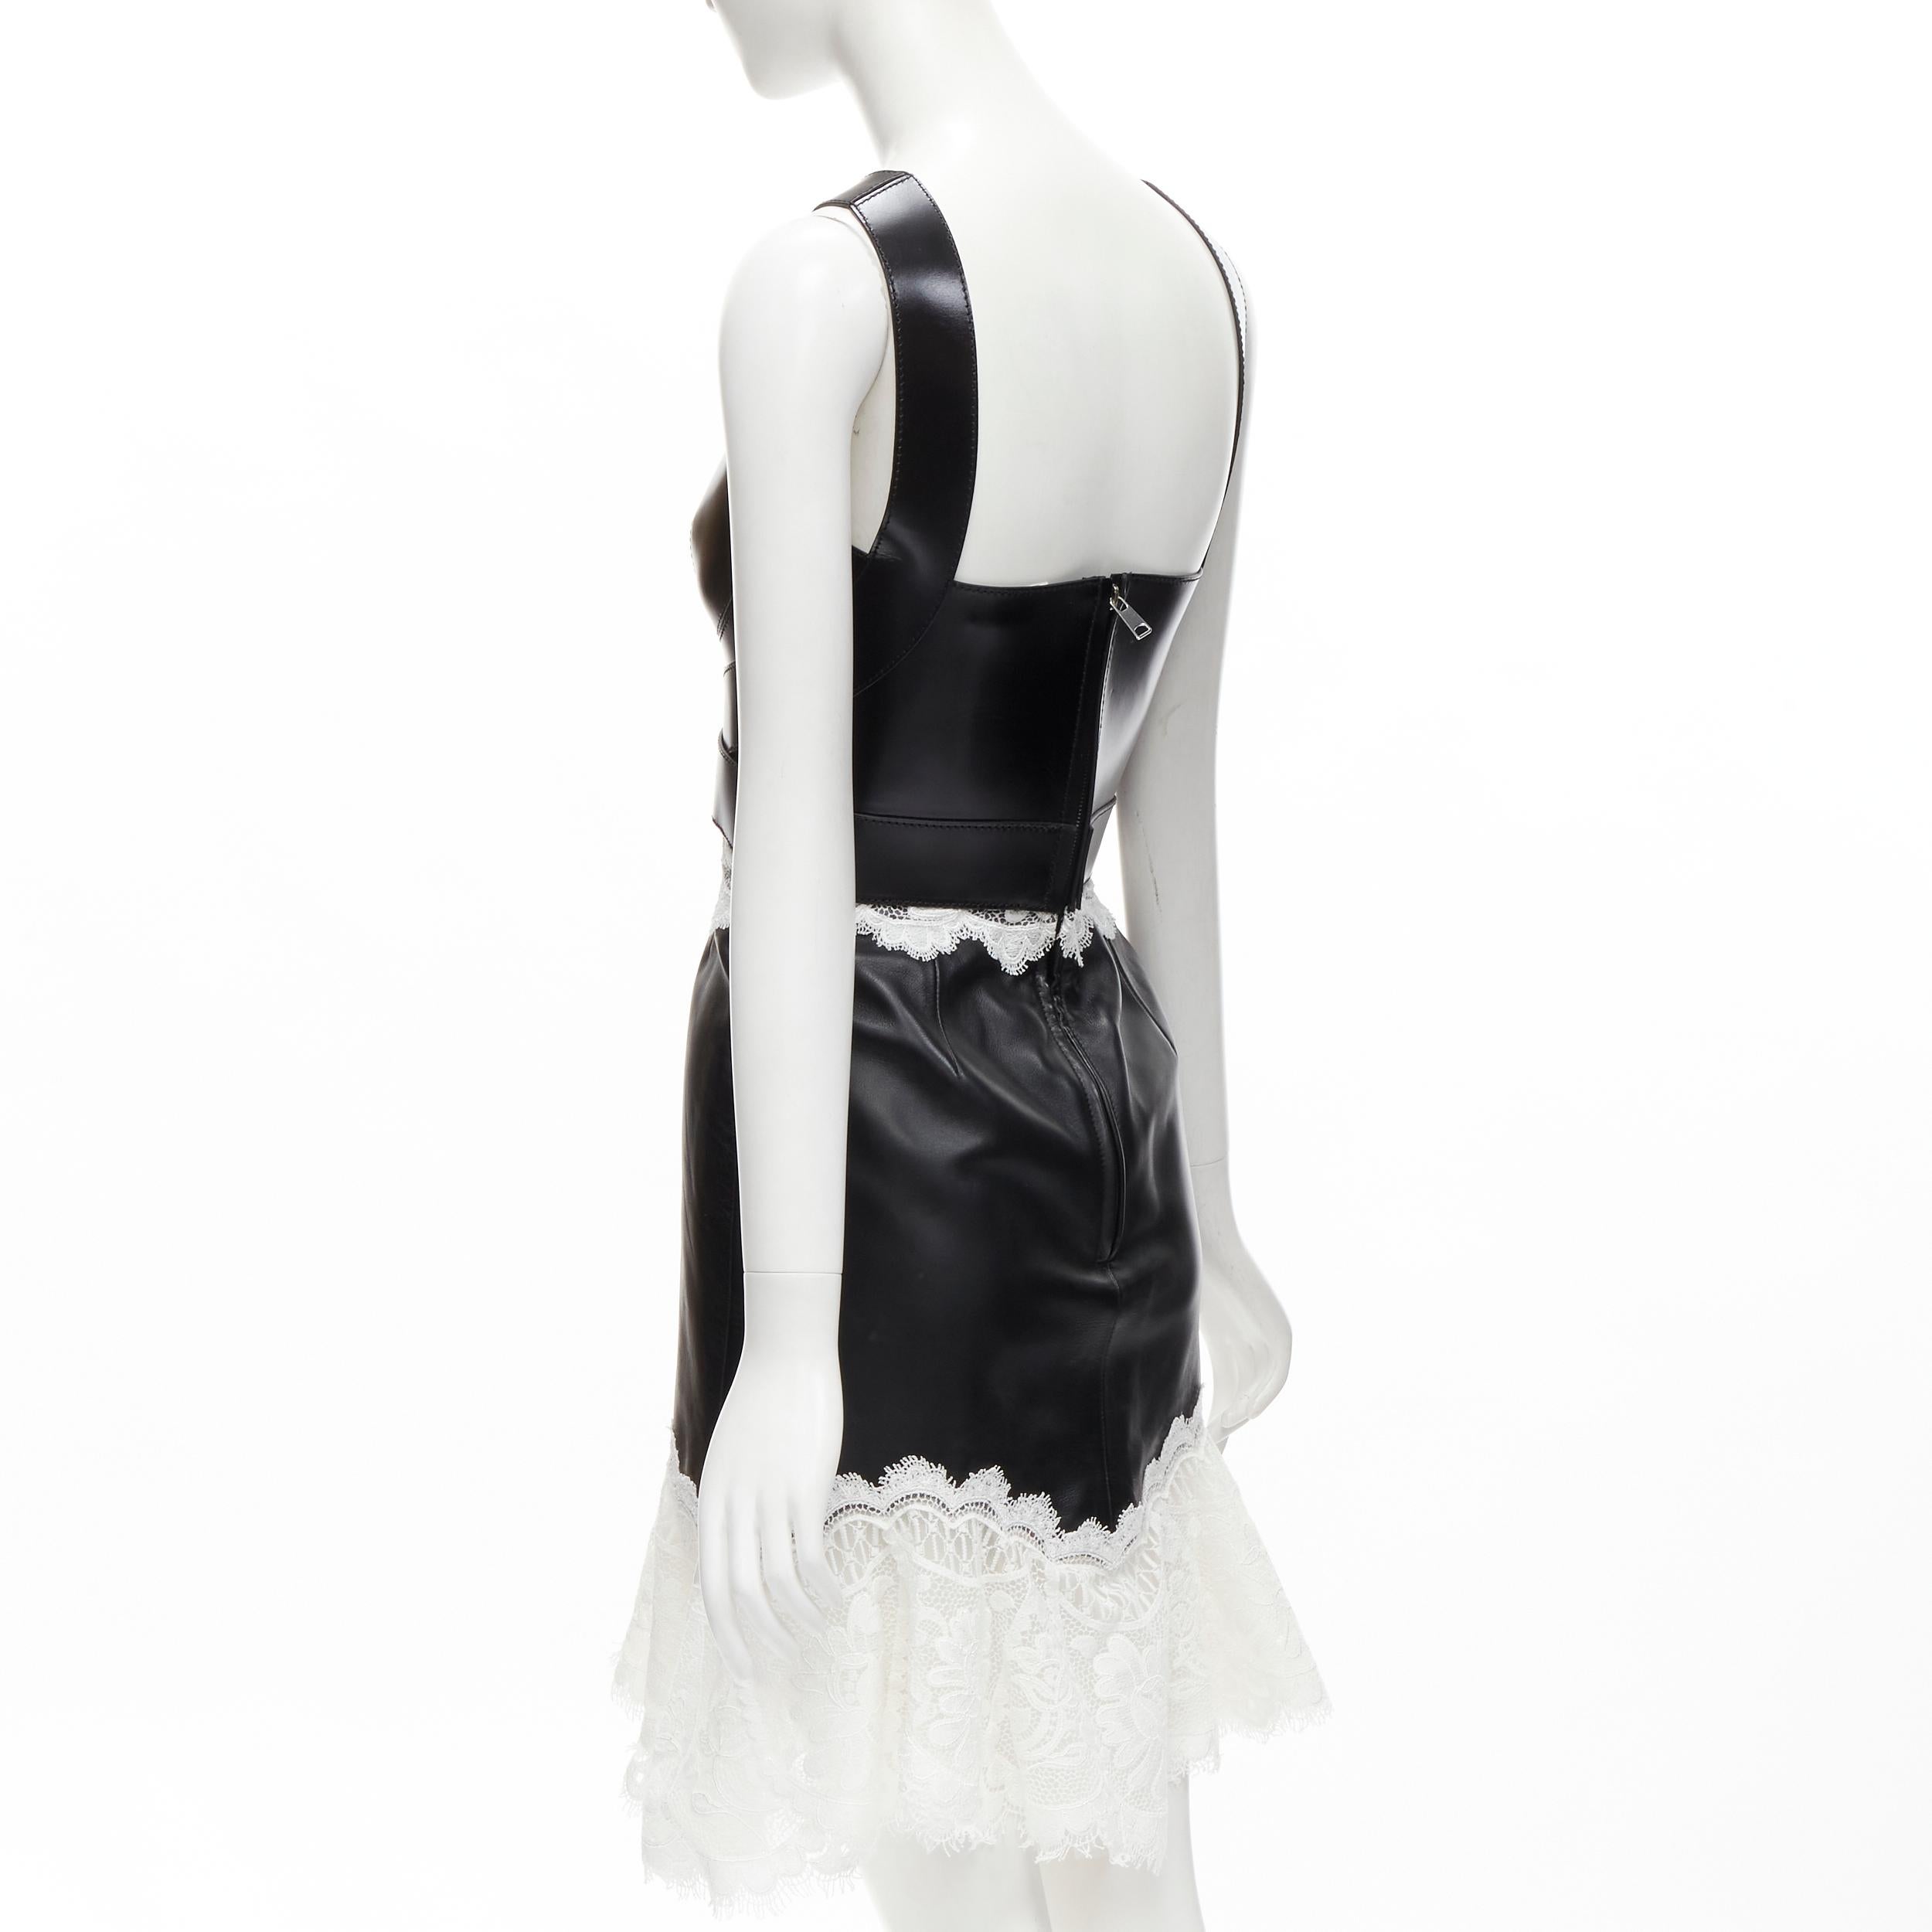 ALEXANDER MCQUEEN 2020 Runway black leather bustier white lace dress IT38 S For Sale 1